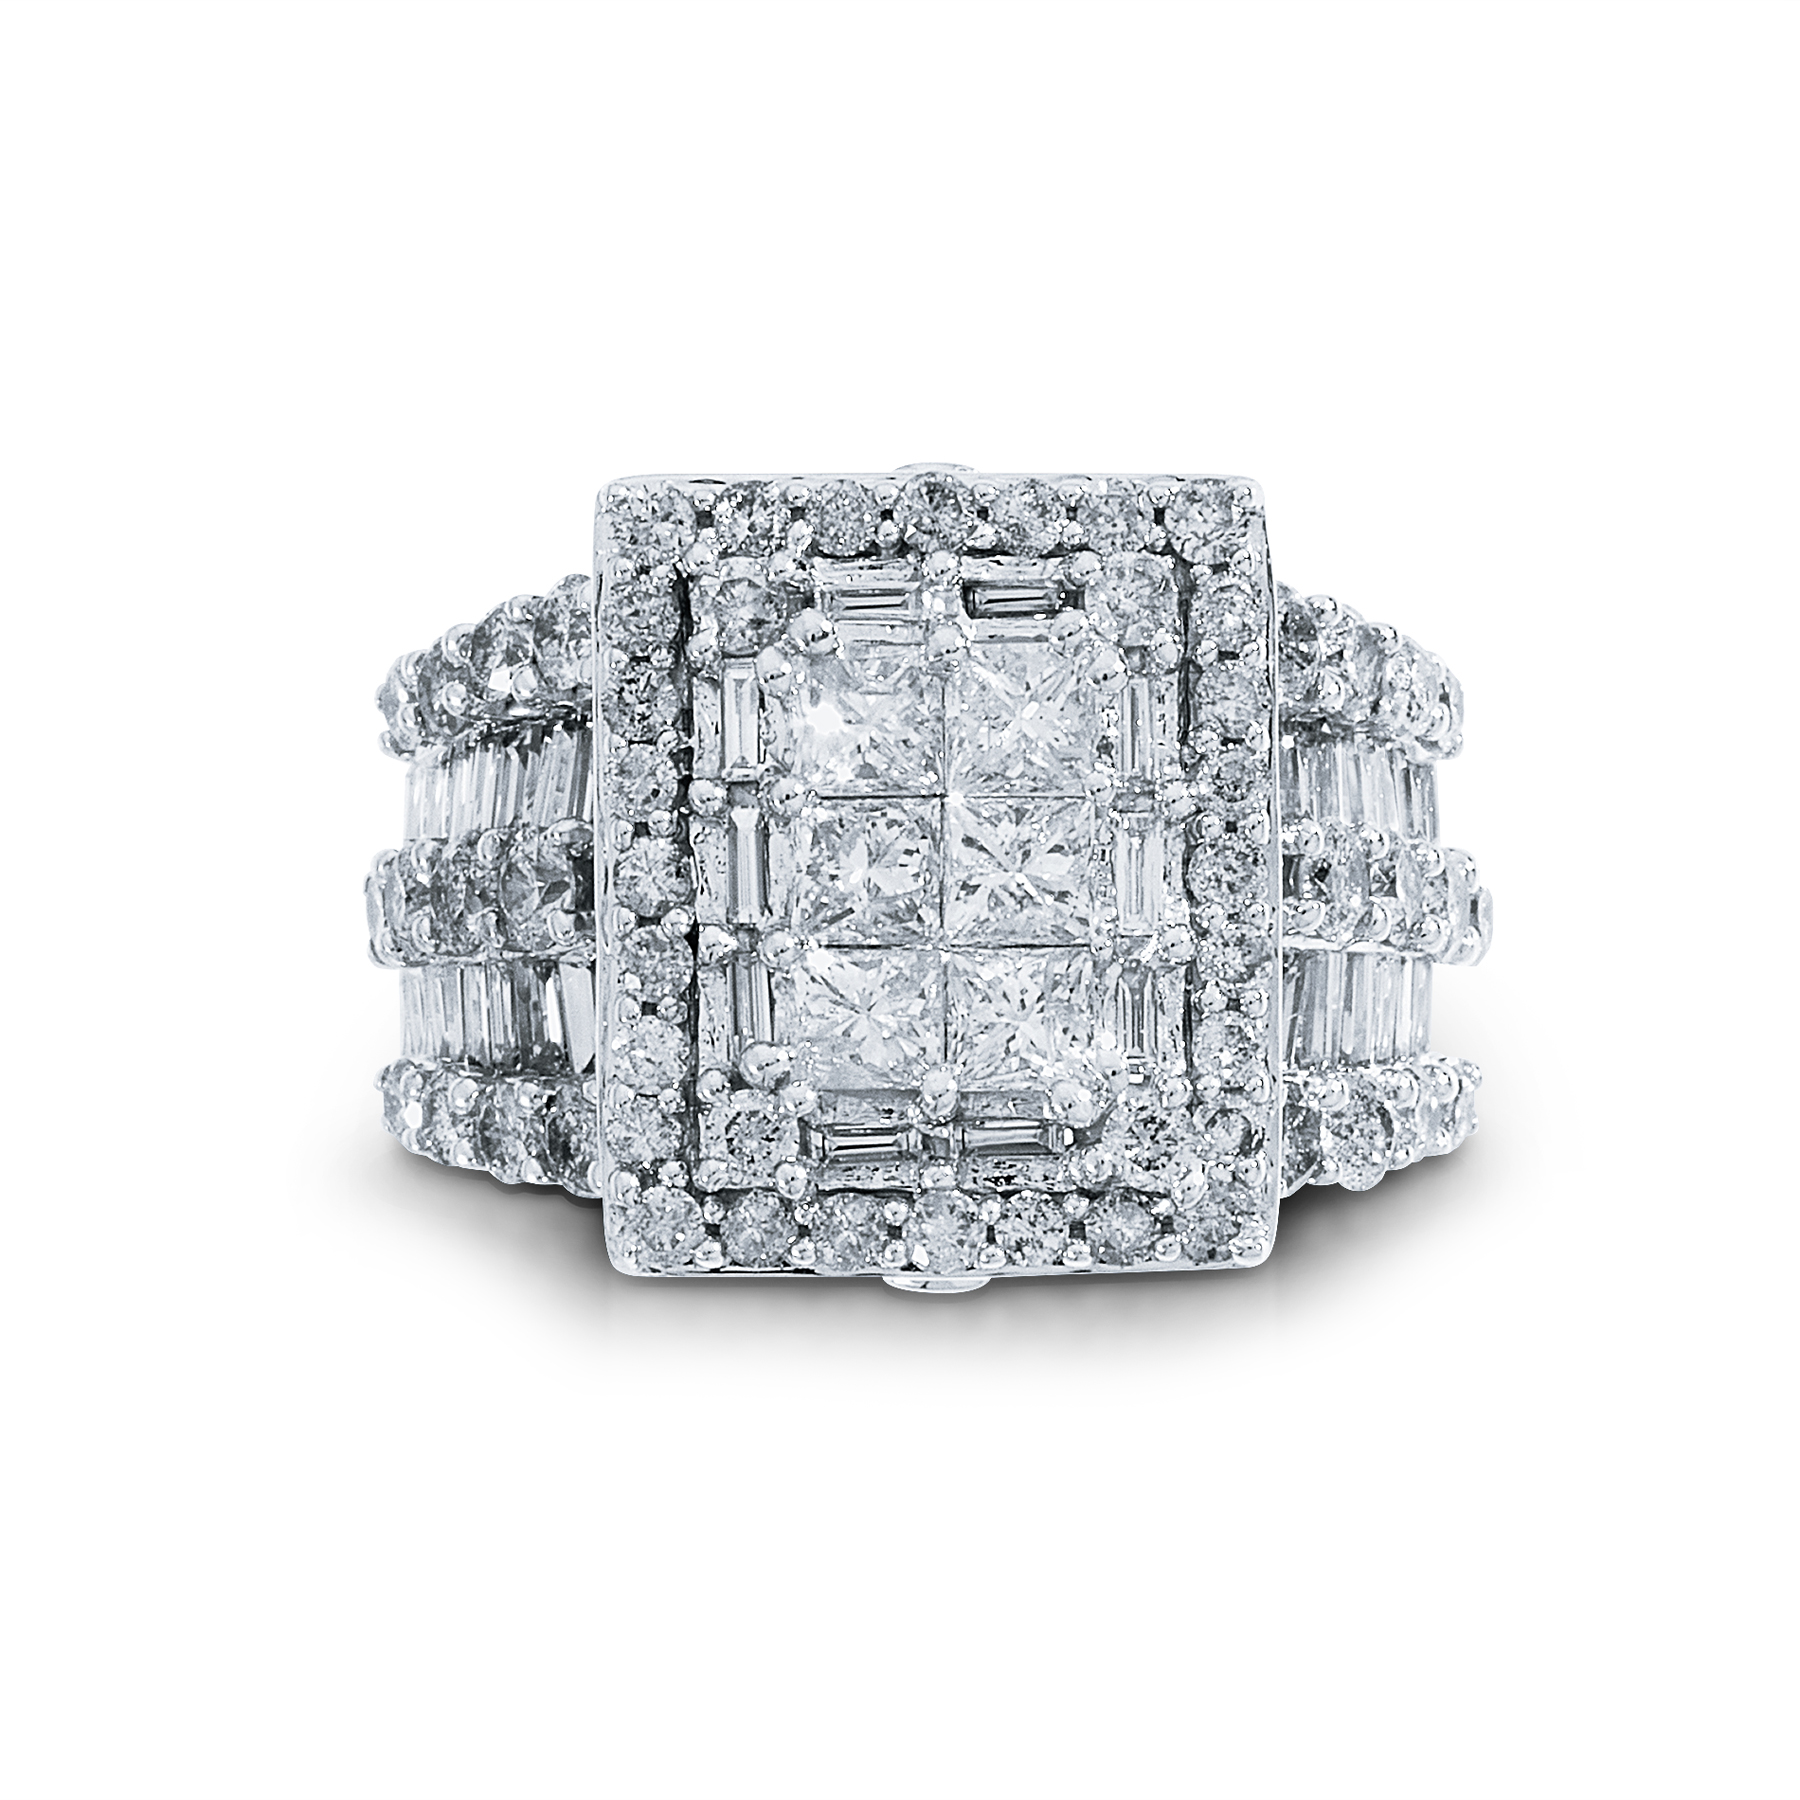 Tradition Diamond 4 Cttw. Princess Cut 10K White Gold Diamond Engagement Ring - Size 7 Only